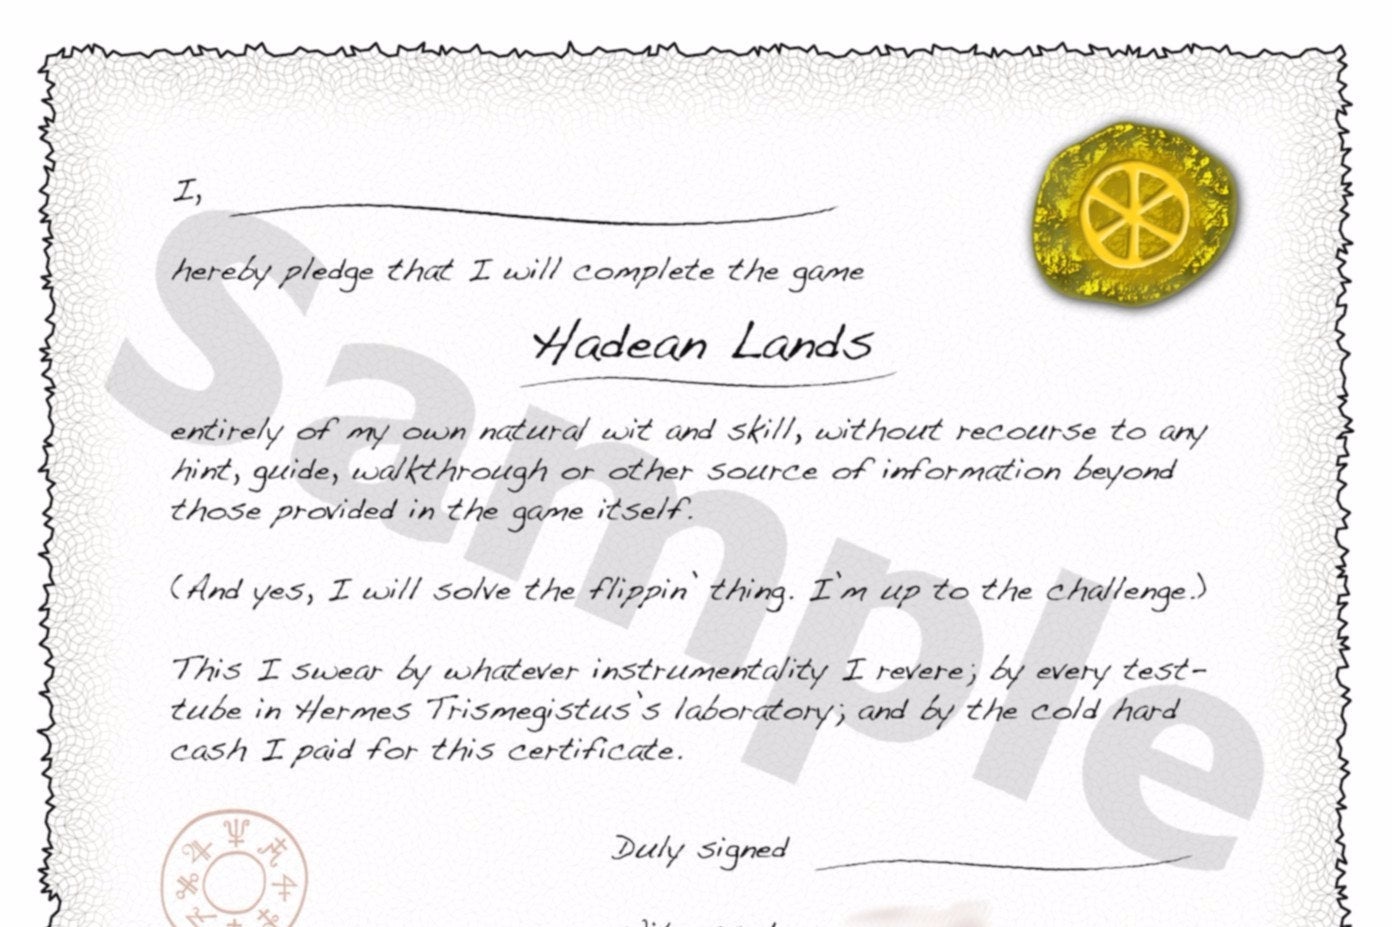 Image for Steam game's £27 DLC is a PDF certificate